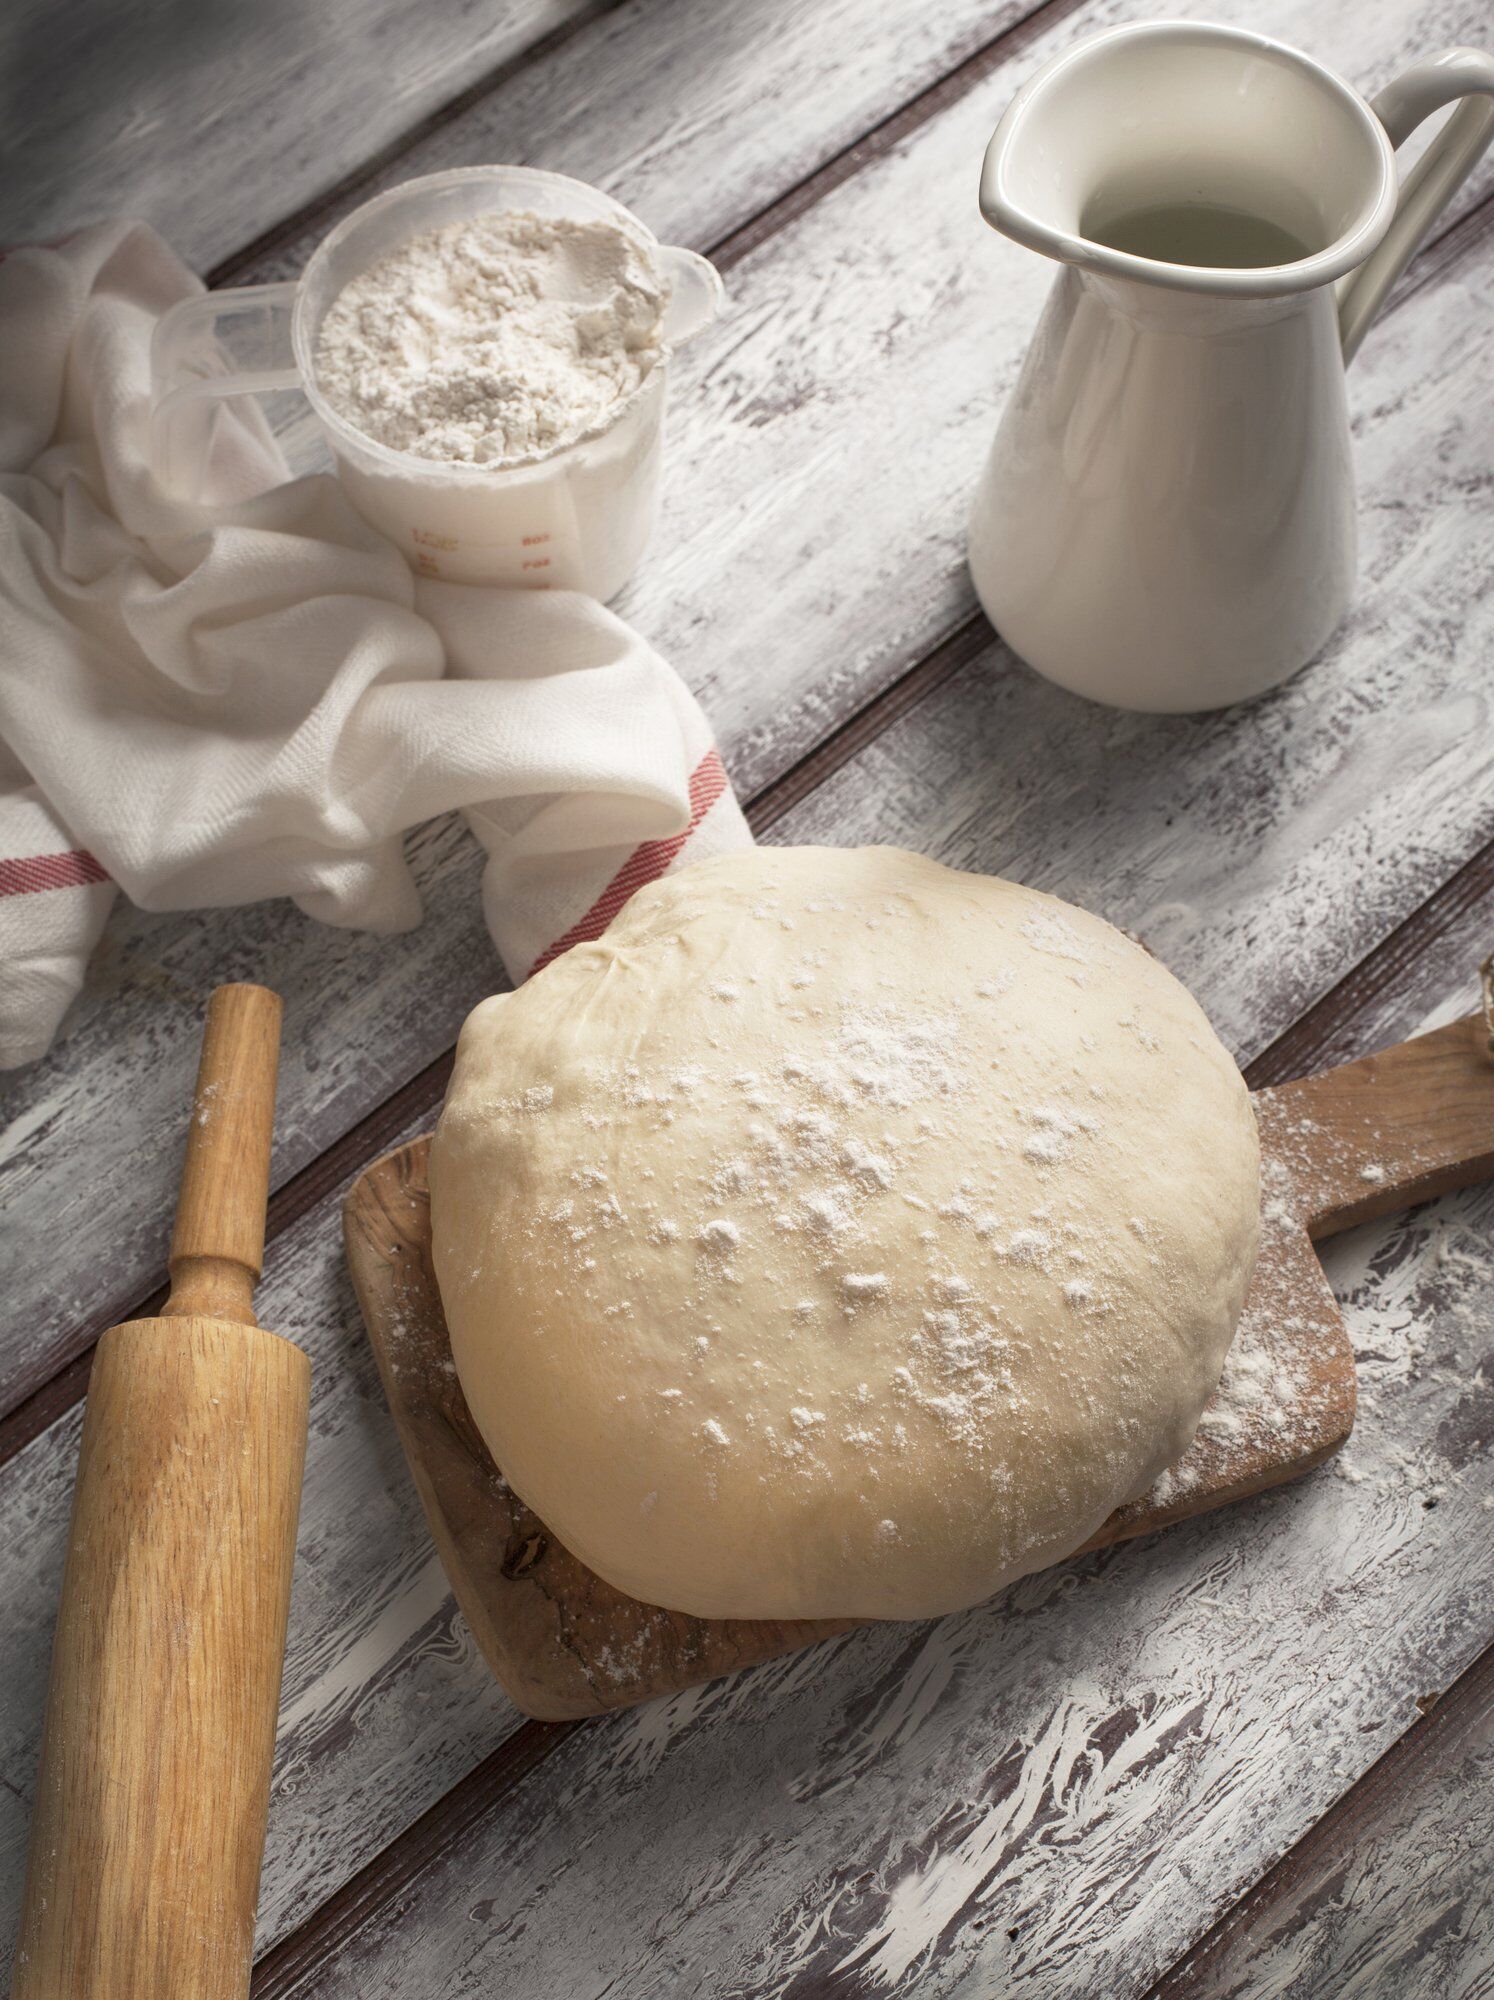 How to make yeast dough properly